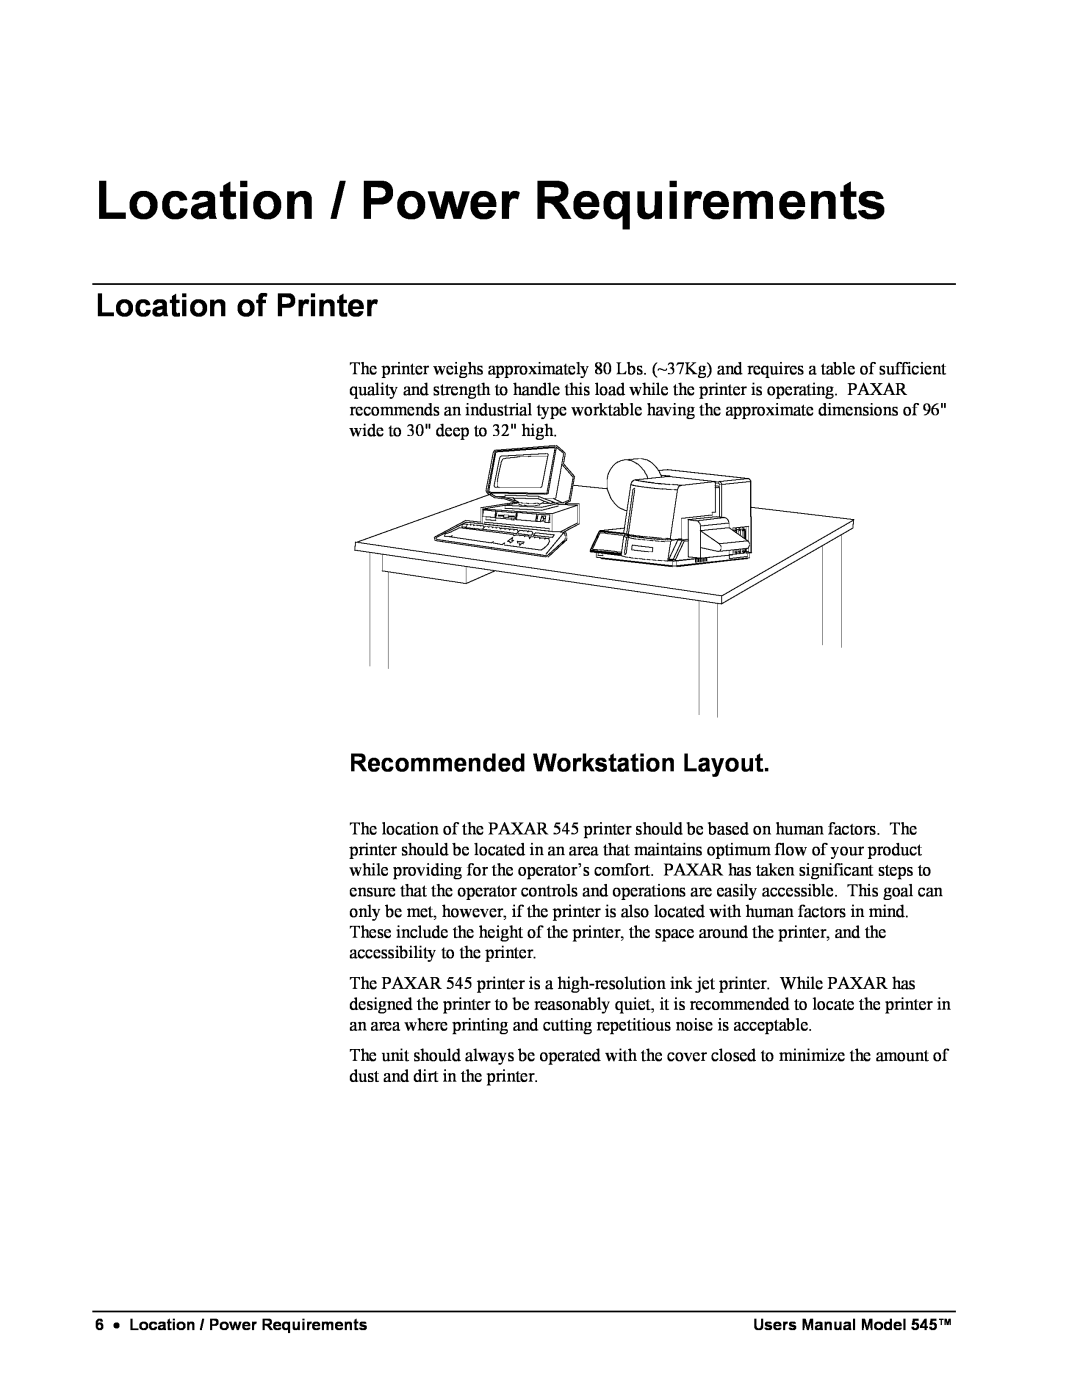 Paxar 545 user manual Location / Power Requirements, Location of Printer, Recommended Workstation Layout 